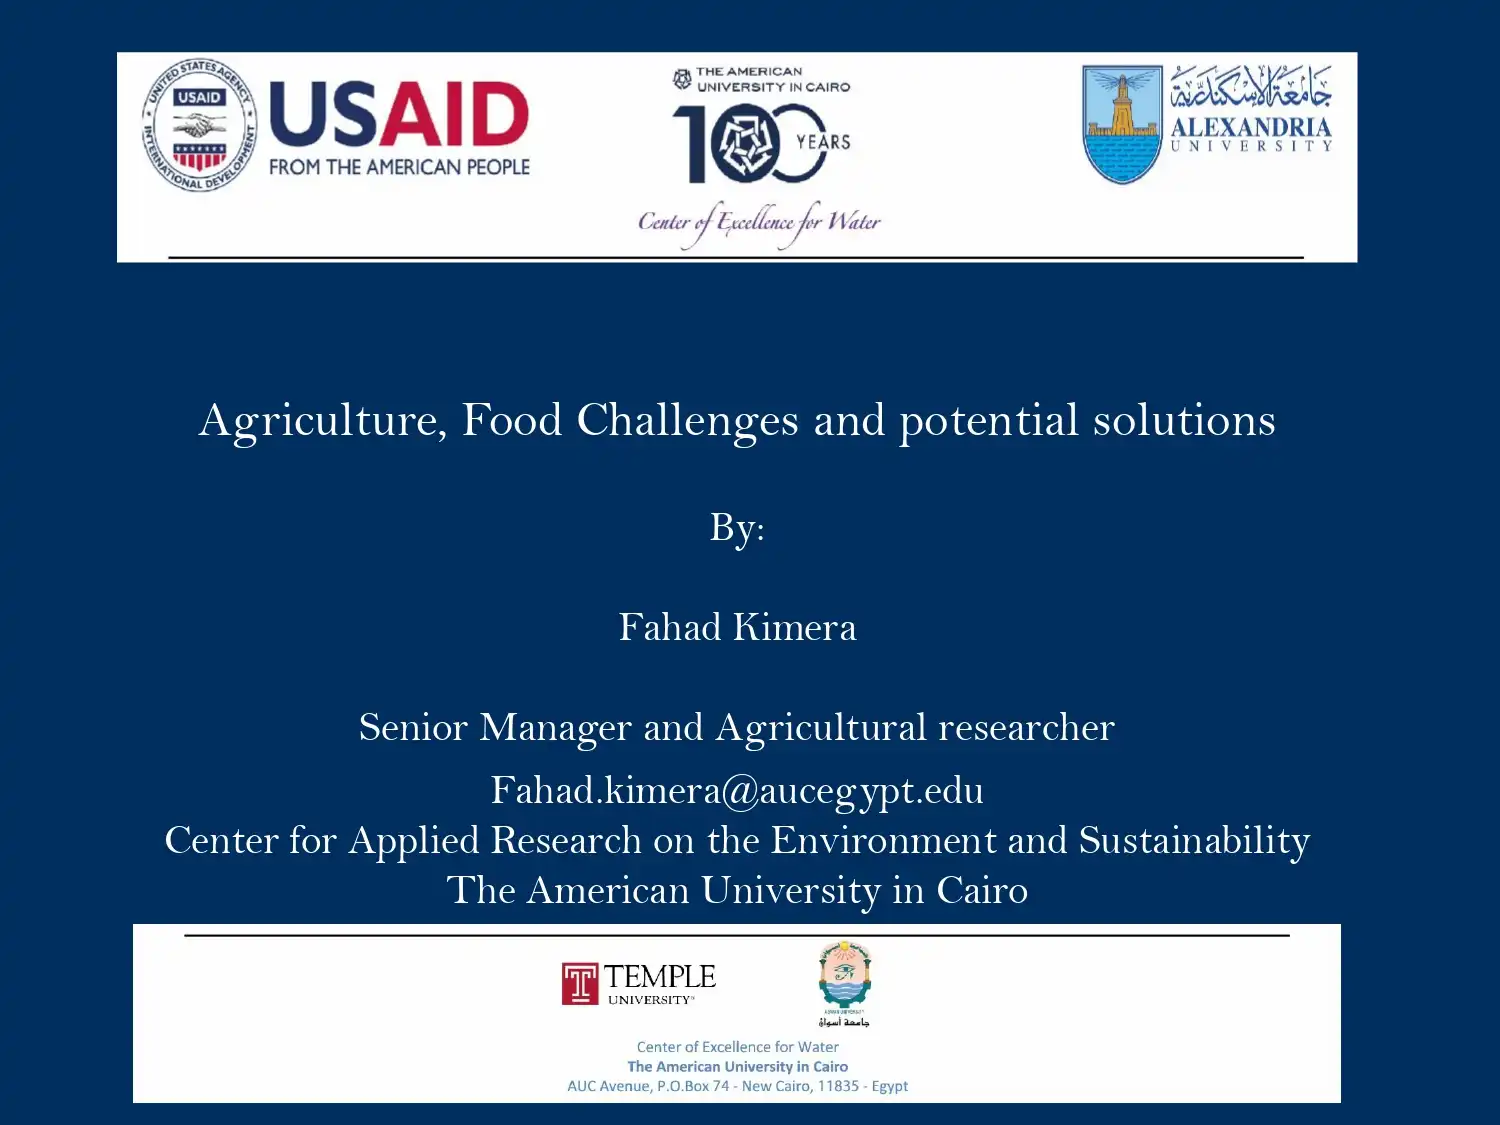 Agriculture, Food Challenges and Potential Solutions